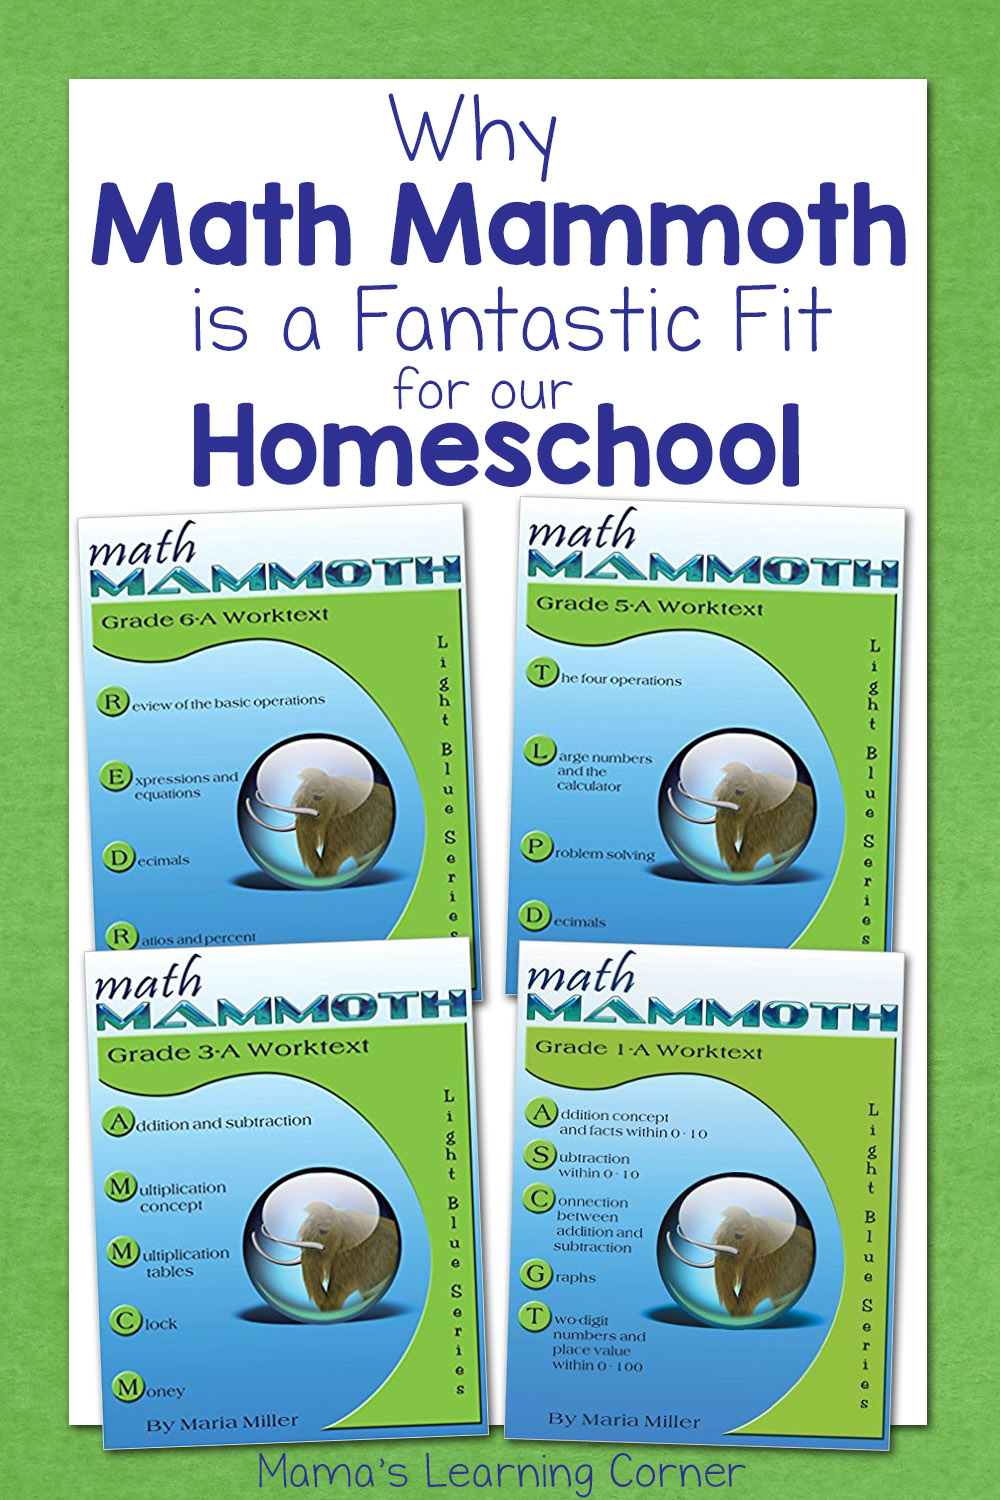 Why Math Mammoth is a Fantastic Fit for Our Homeschool